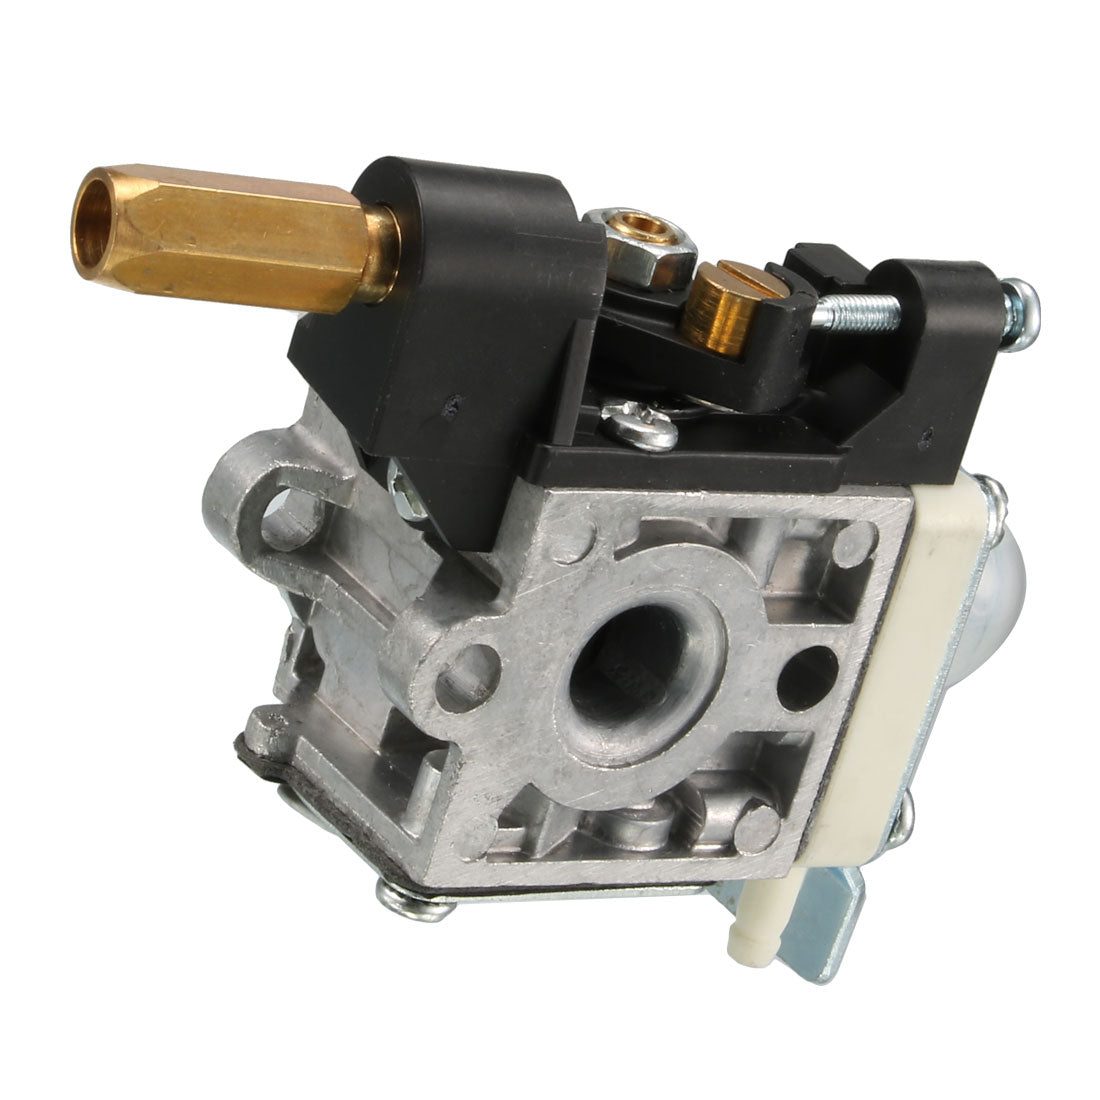 uxcell Uxcell New Carburetor for ZAMA Chainsaw Parts Lawn Mower RB-K75 Carburador Carb